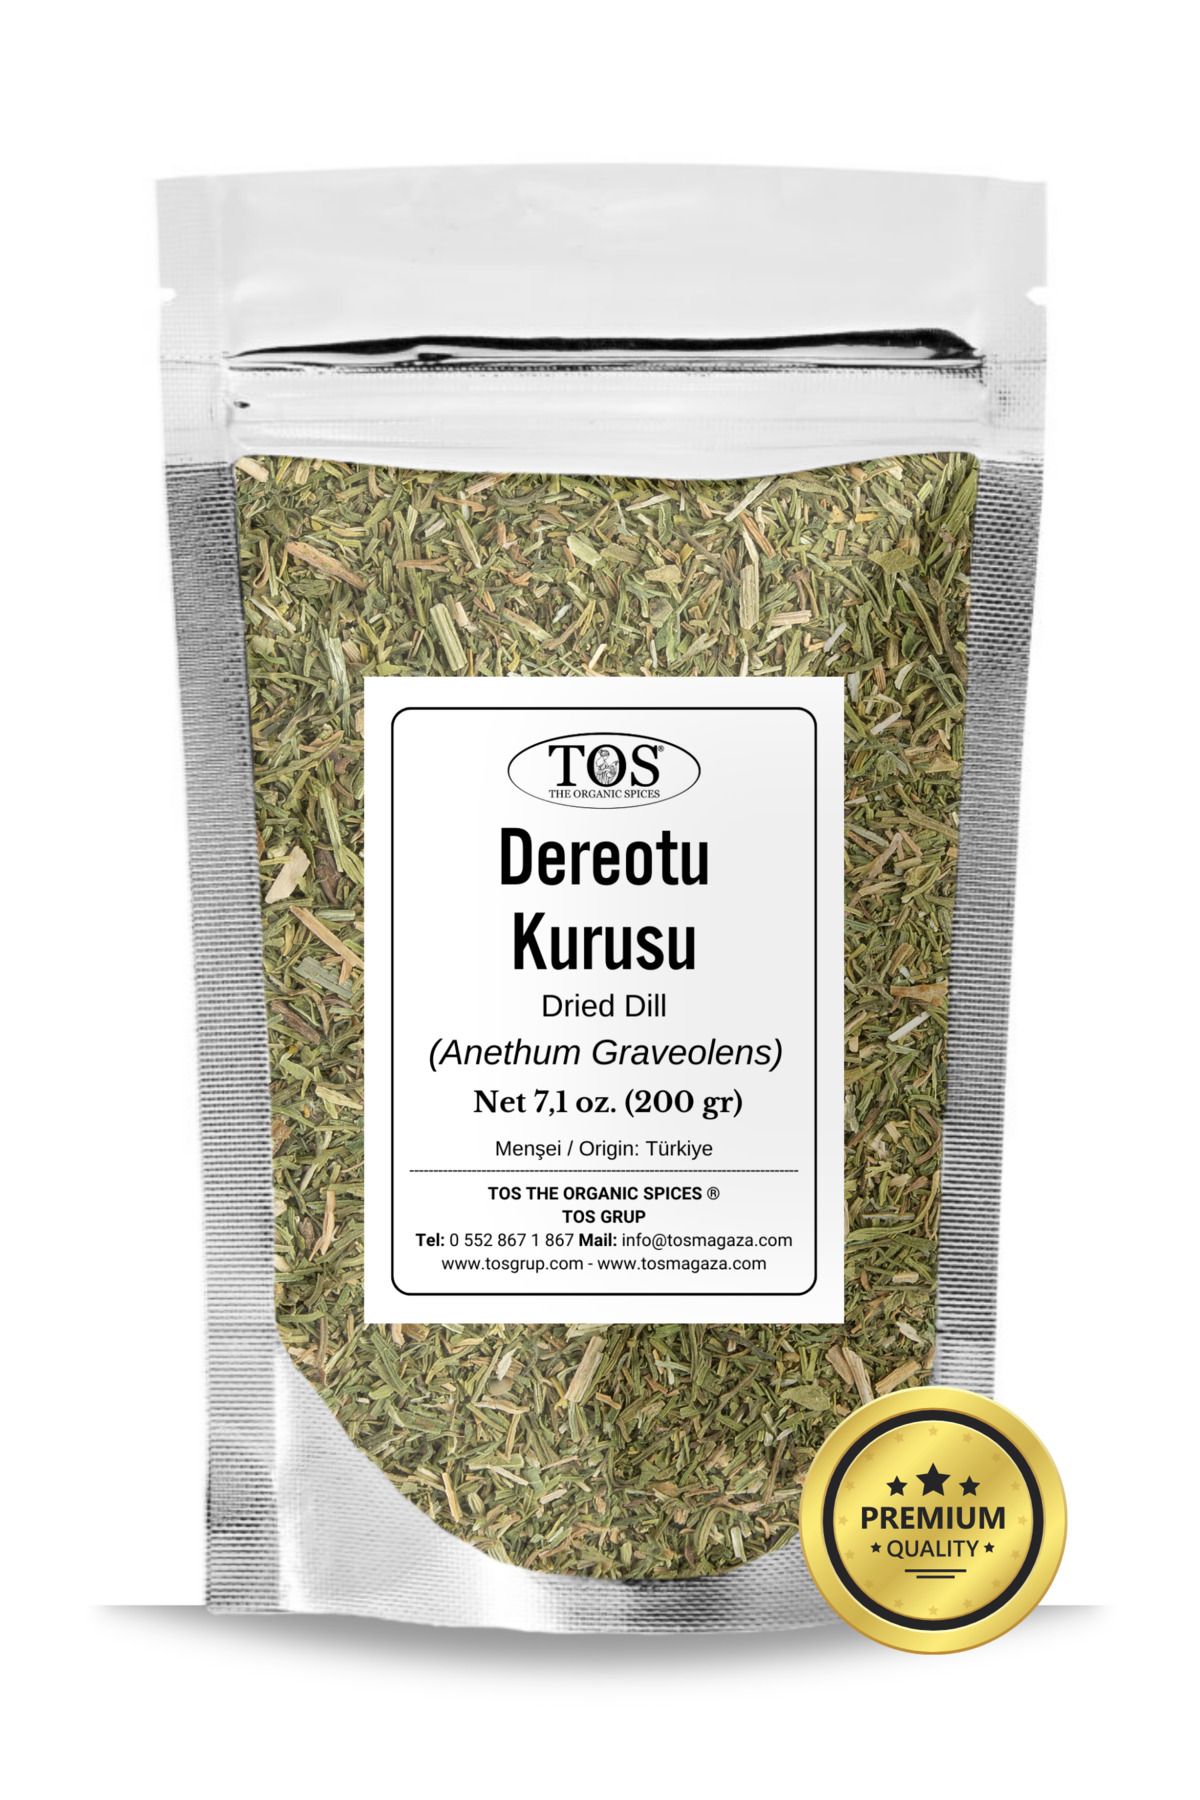 TOS The Organic Spices Dereotu 200 gr (1. KALİTE) Anethum Graveolens